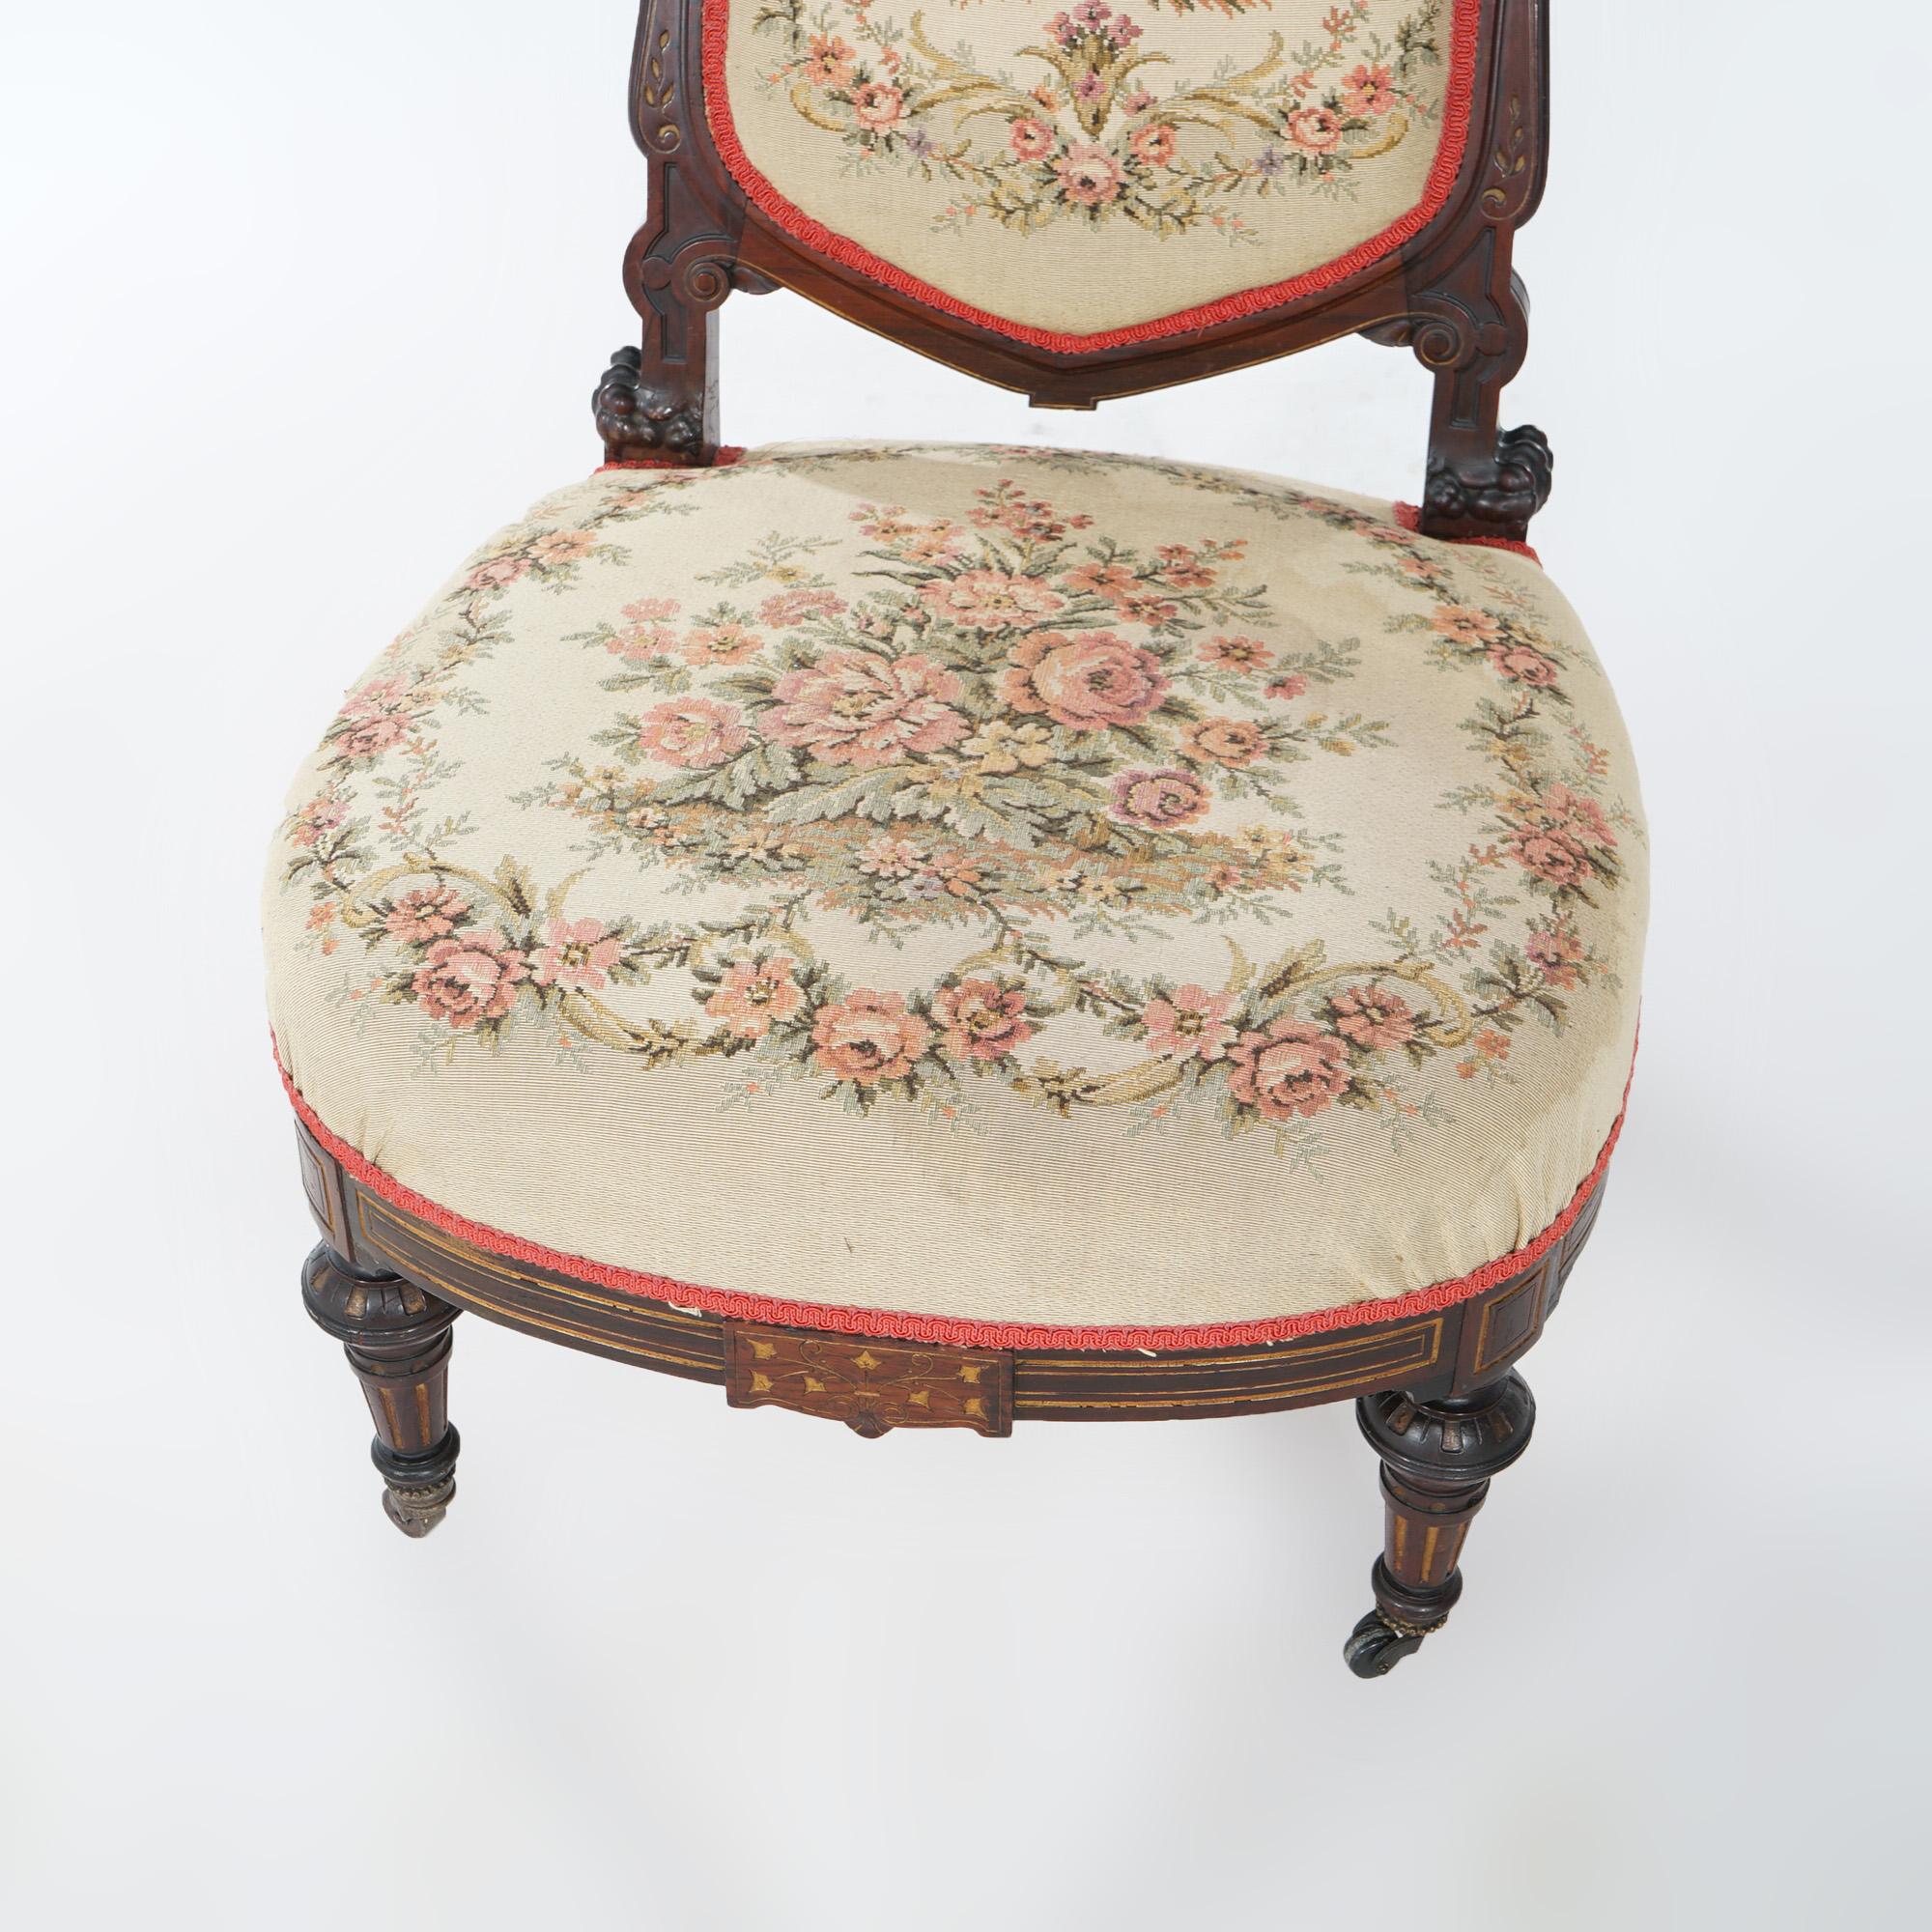 Carved Antique Victorian Rosewood & Gilt Incised Tapestry Slipper Chair, 19th Century